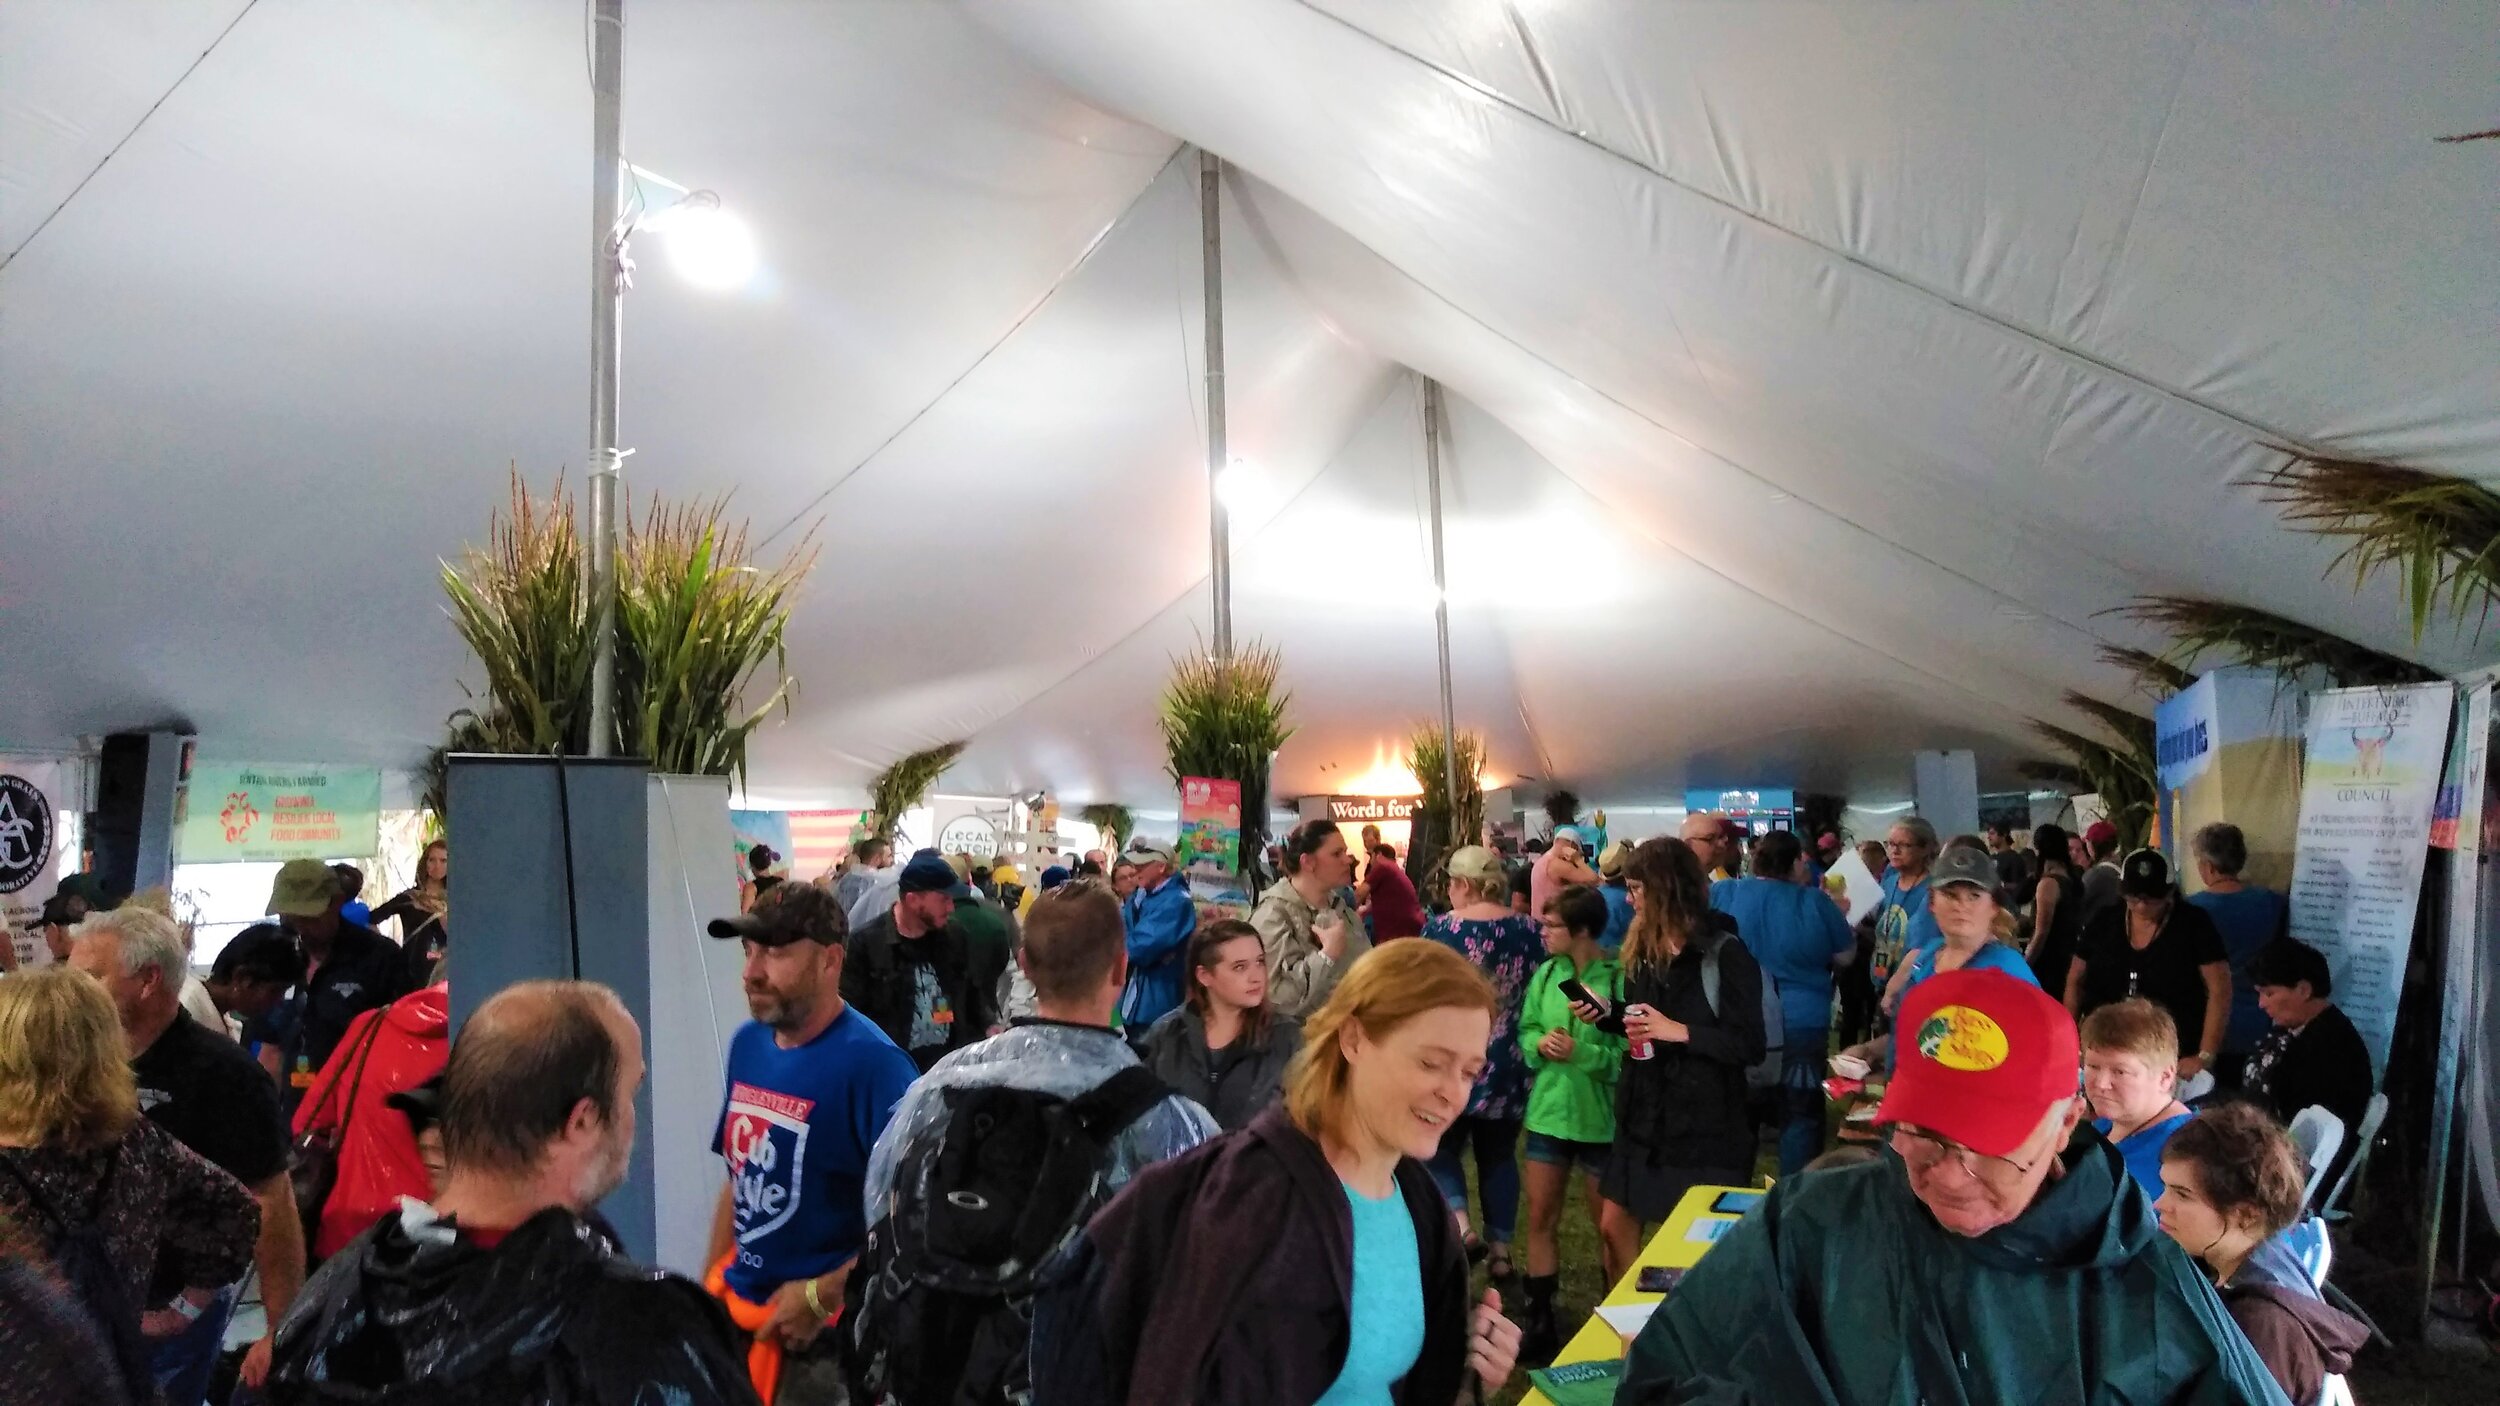  Inside the Homegrown village tent. 